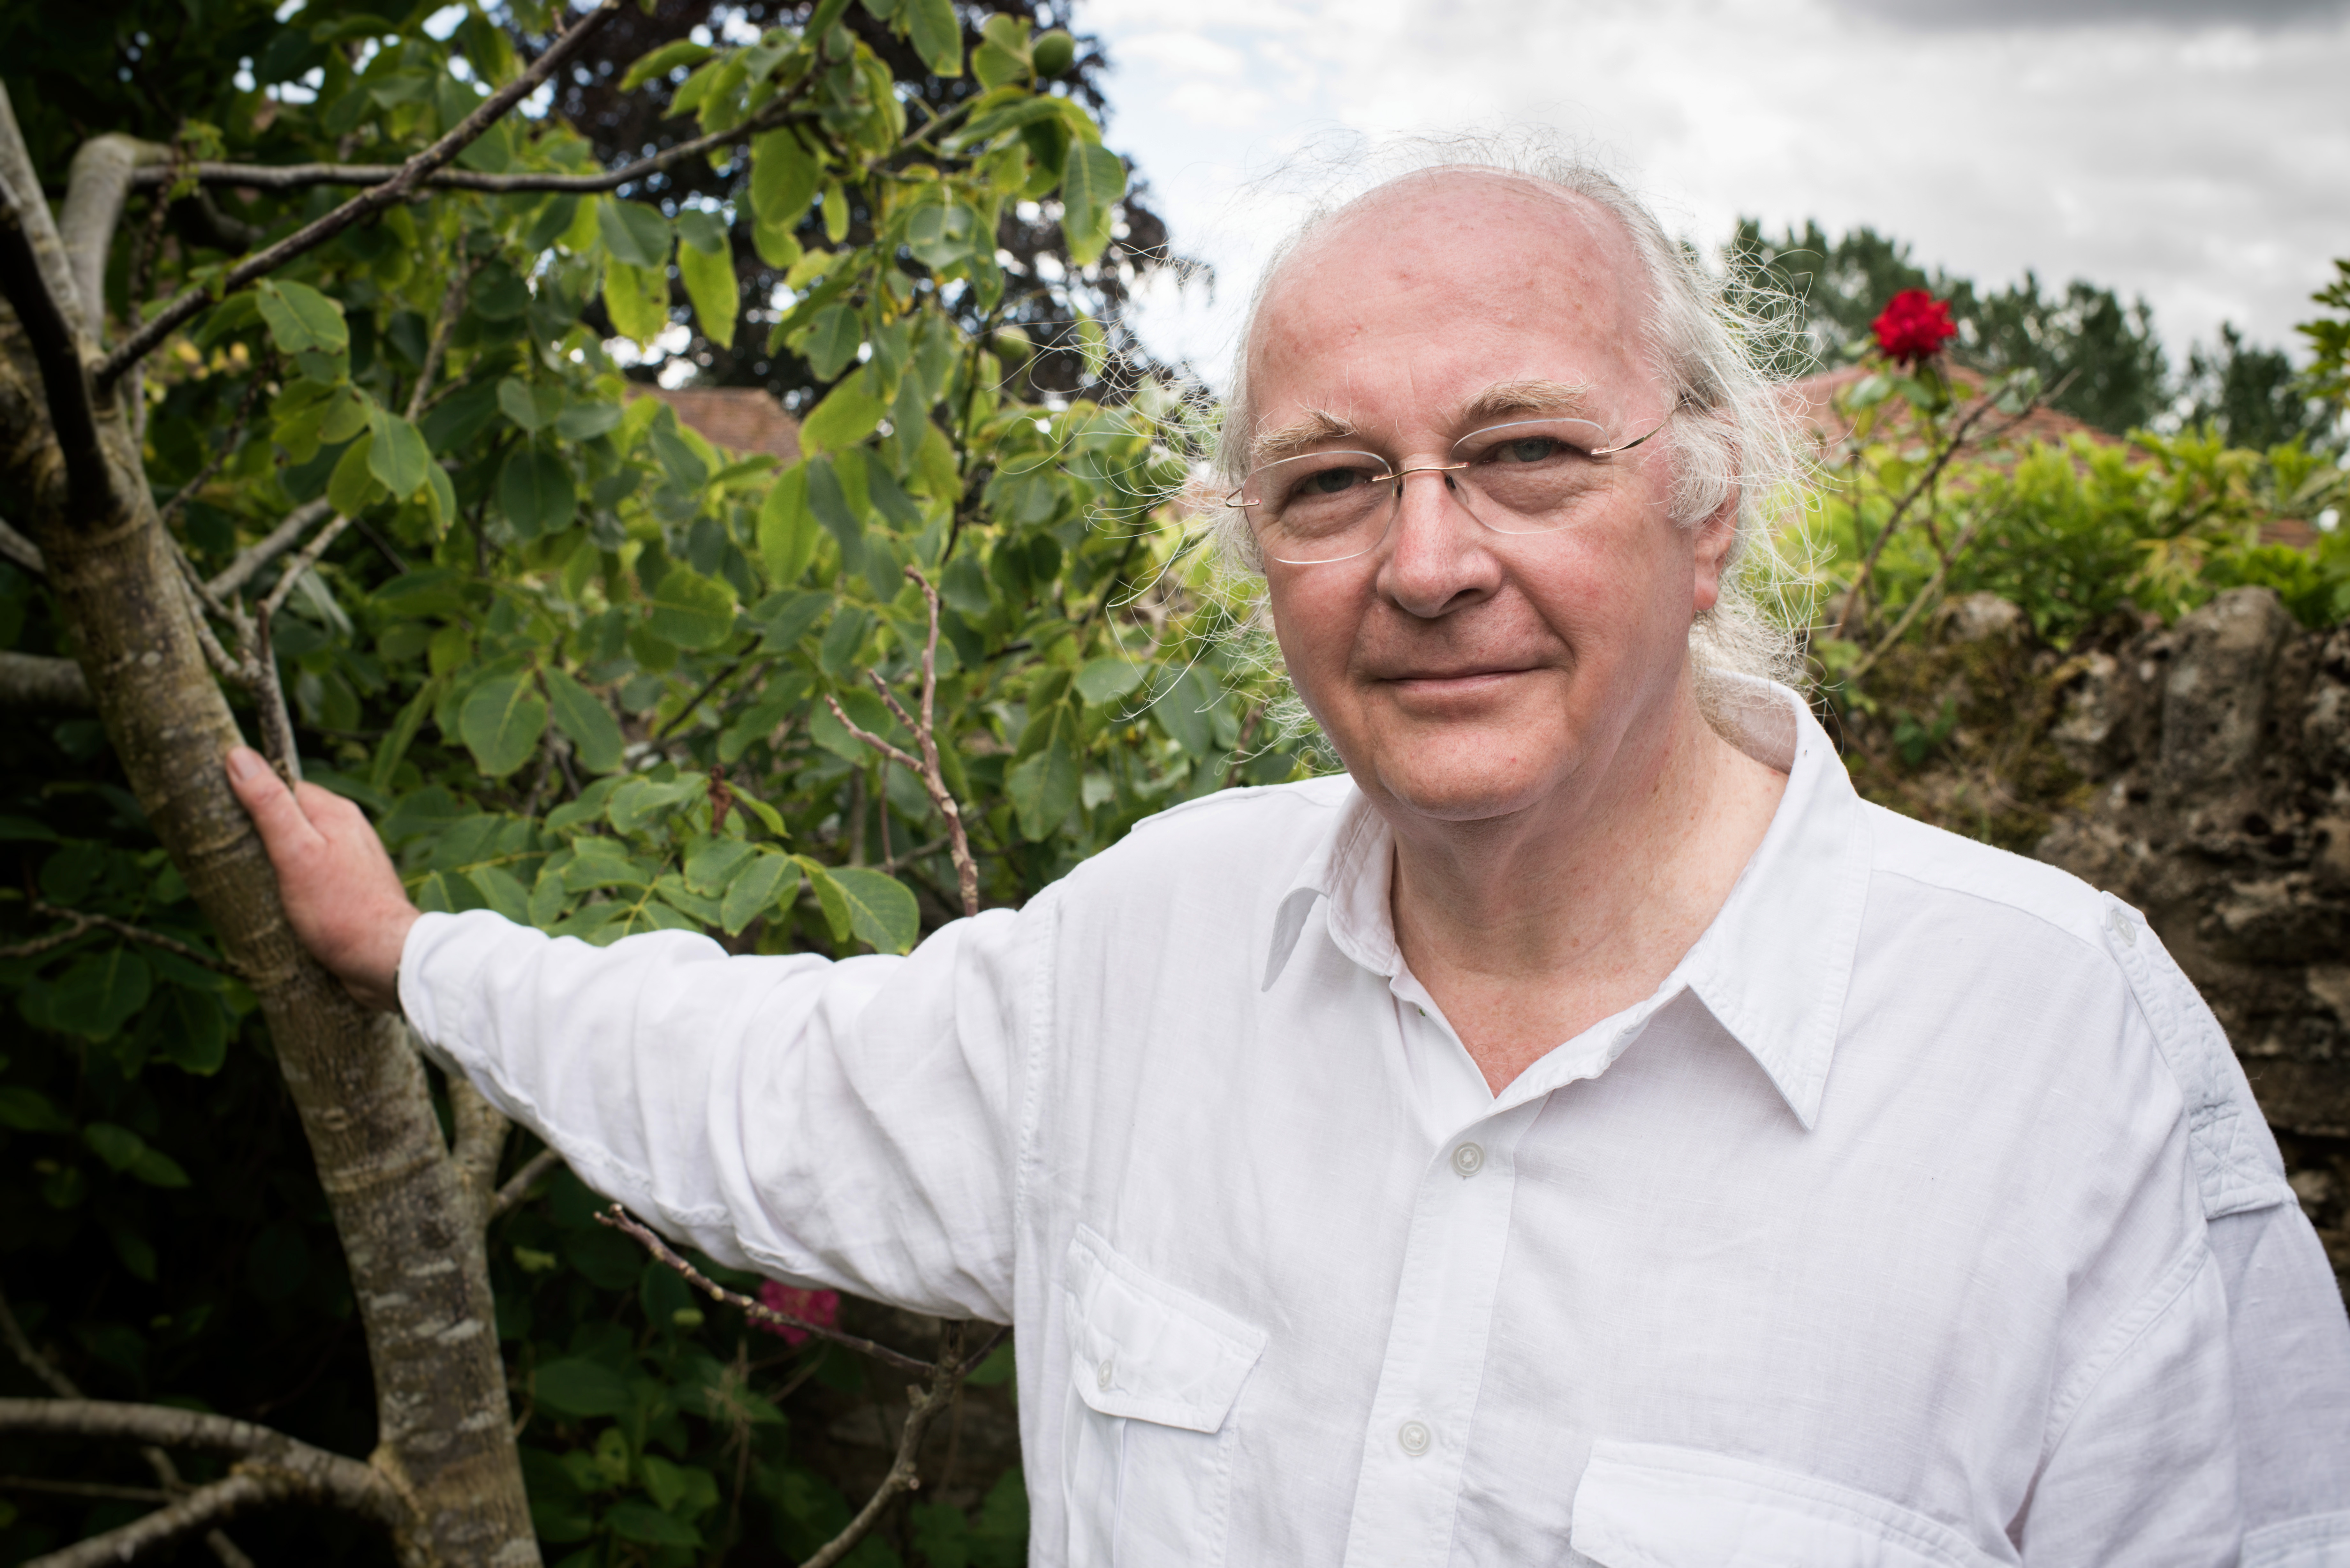 Philip Pullman, who is supporting a Woodland Trust competition, said he is concerned about testing in schools (Philip Formby/Woodland Trust/PA)